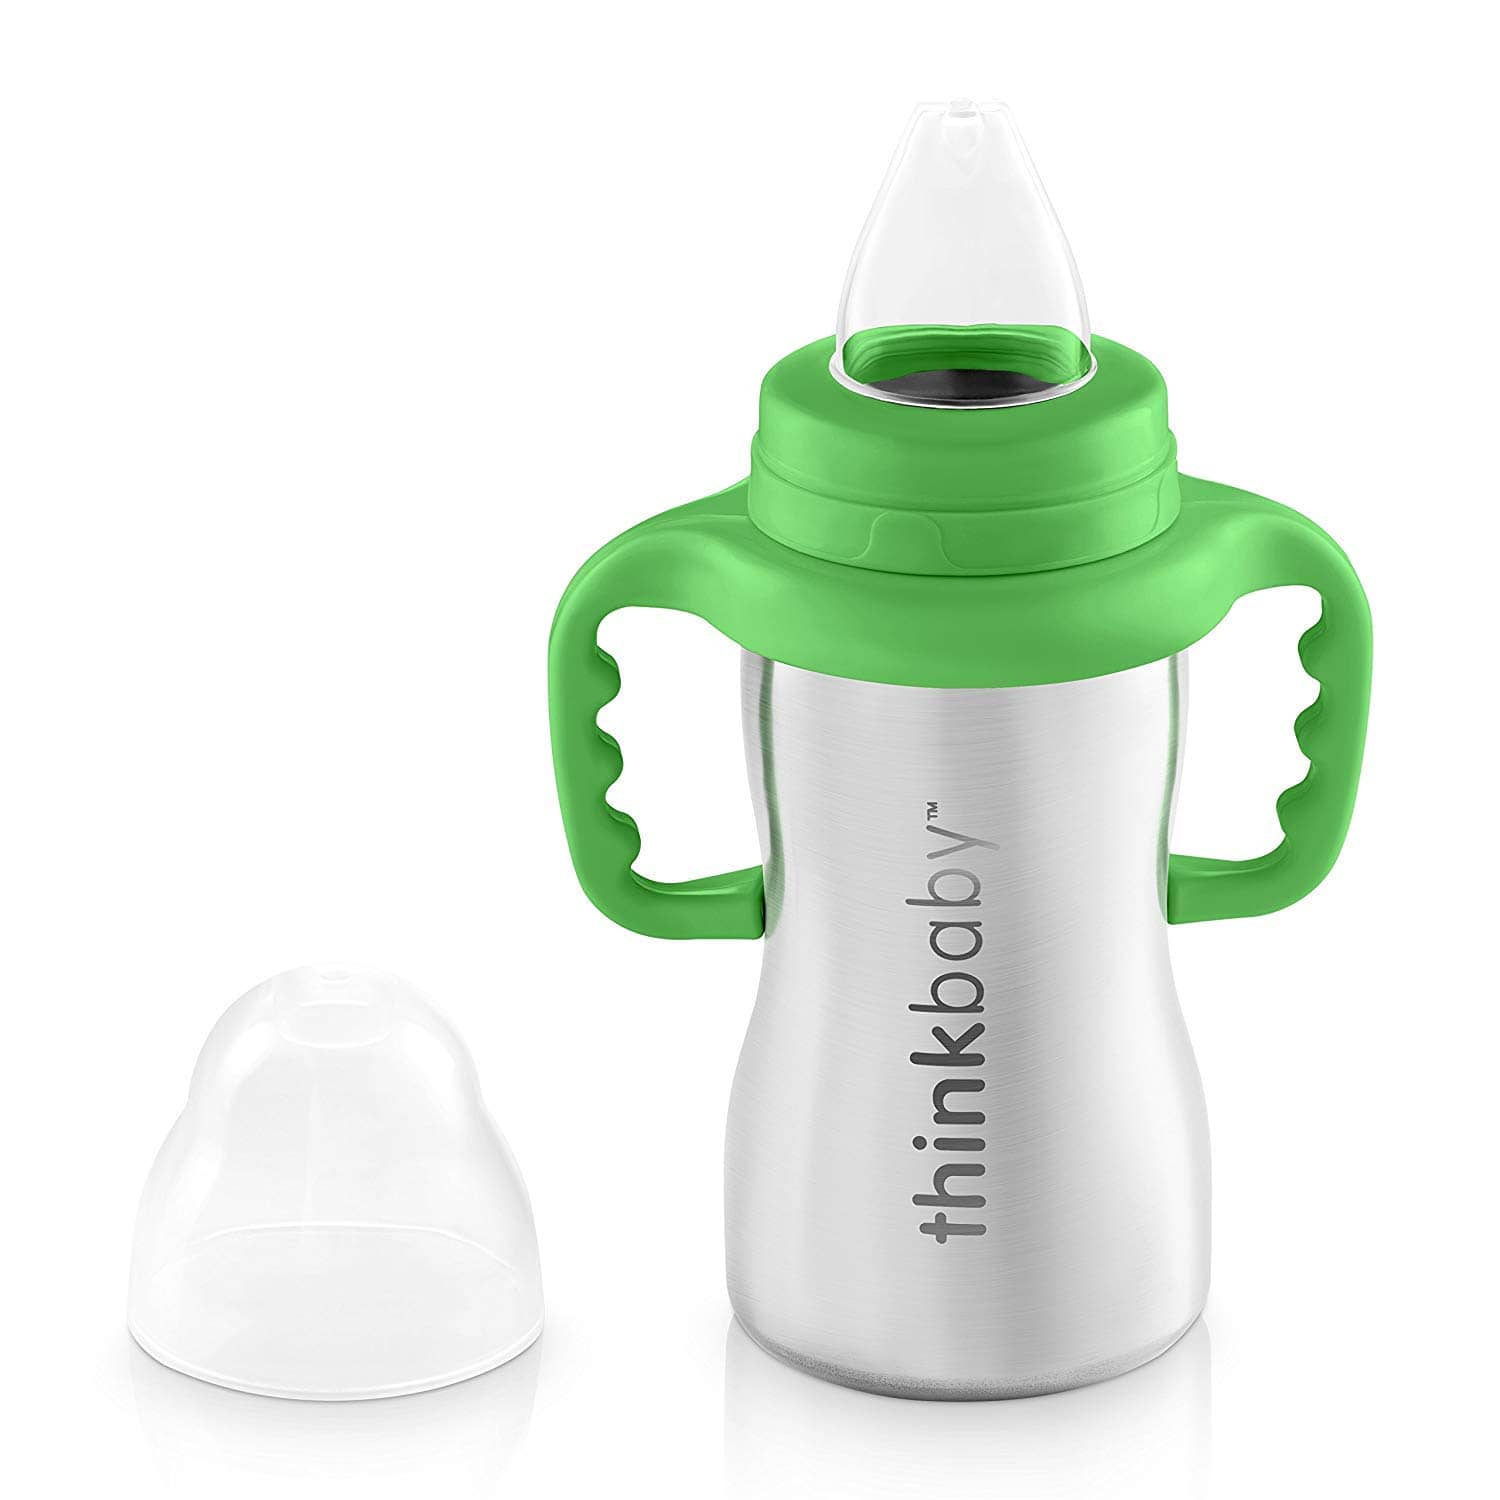 ThinkBaby stainless steel sippy cup with green lid and handles